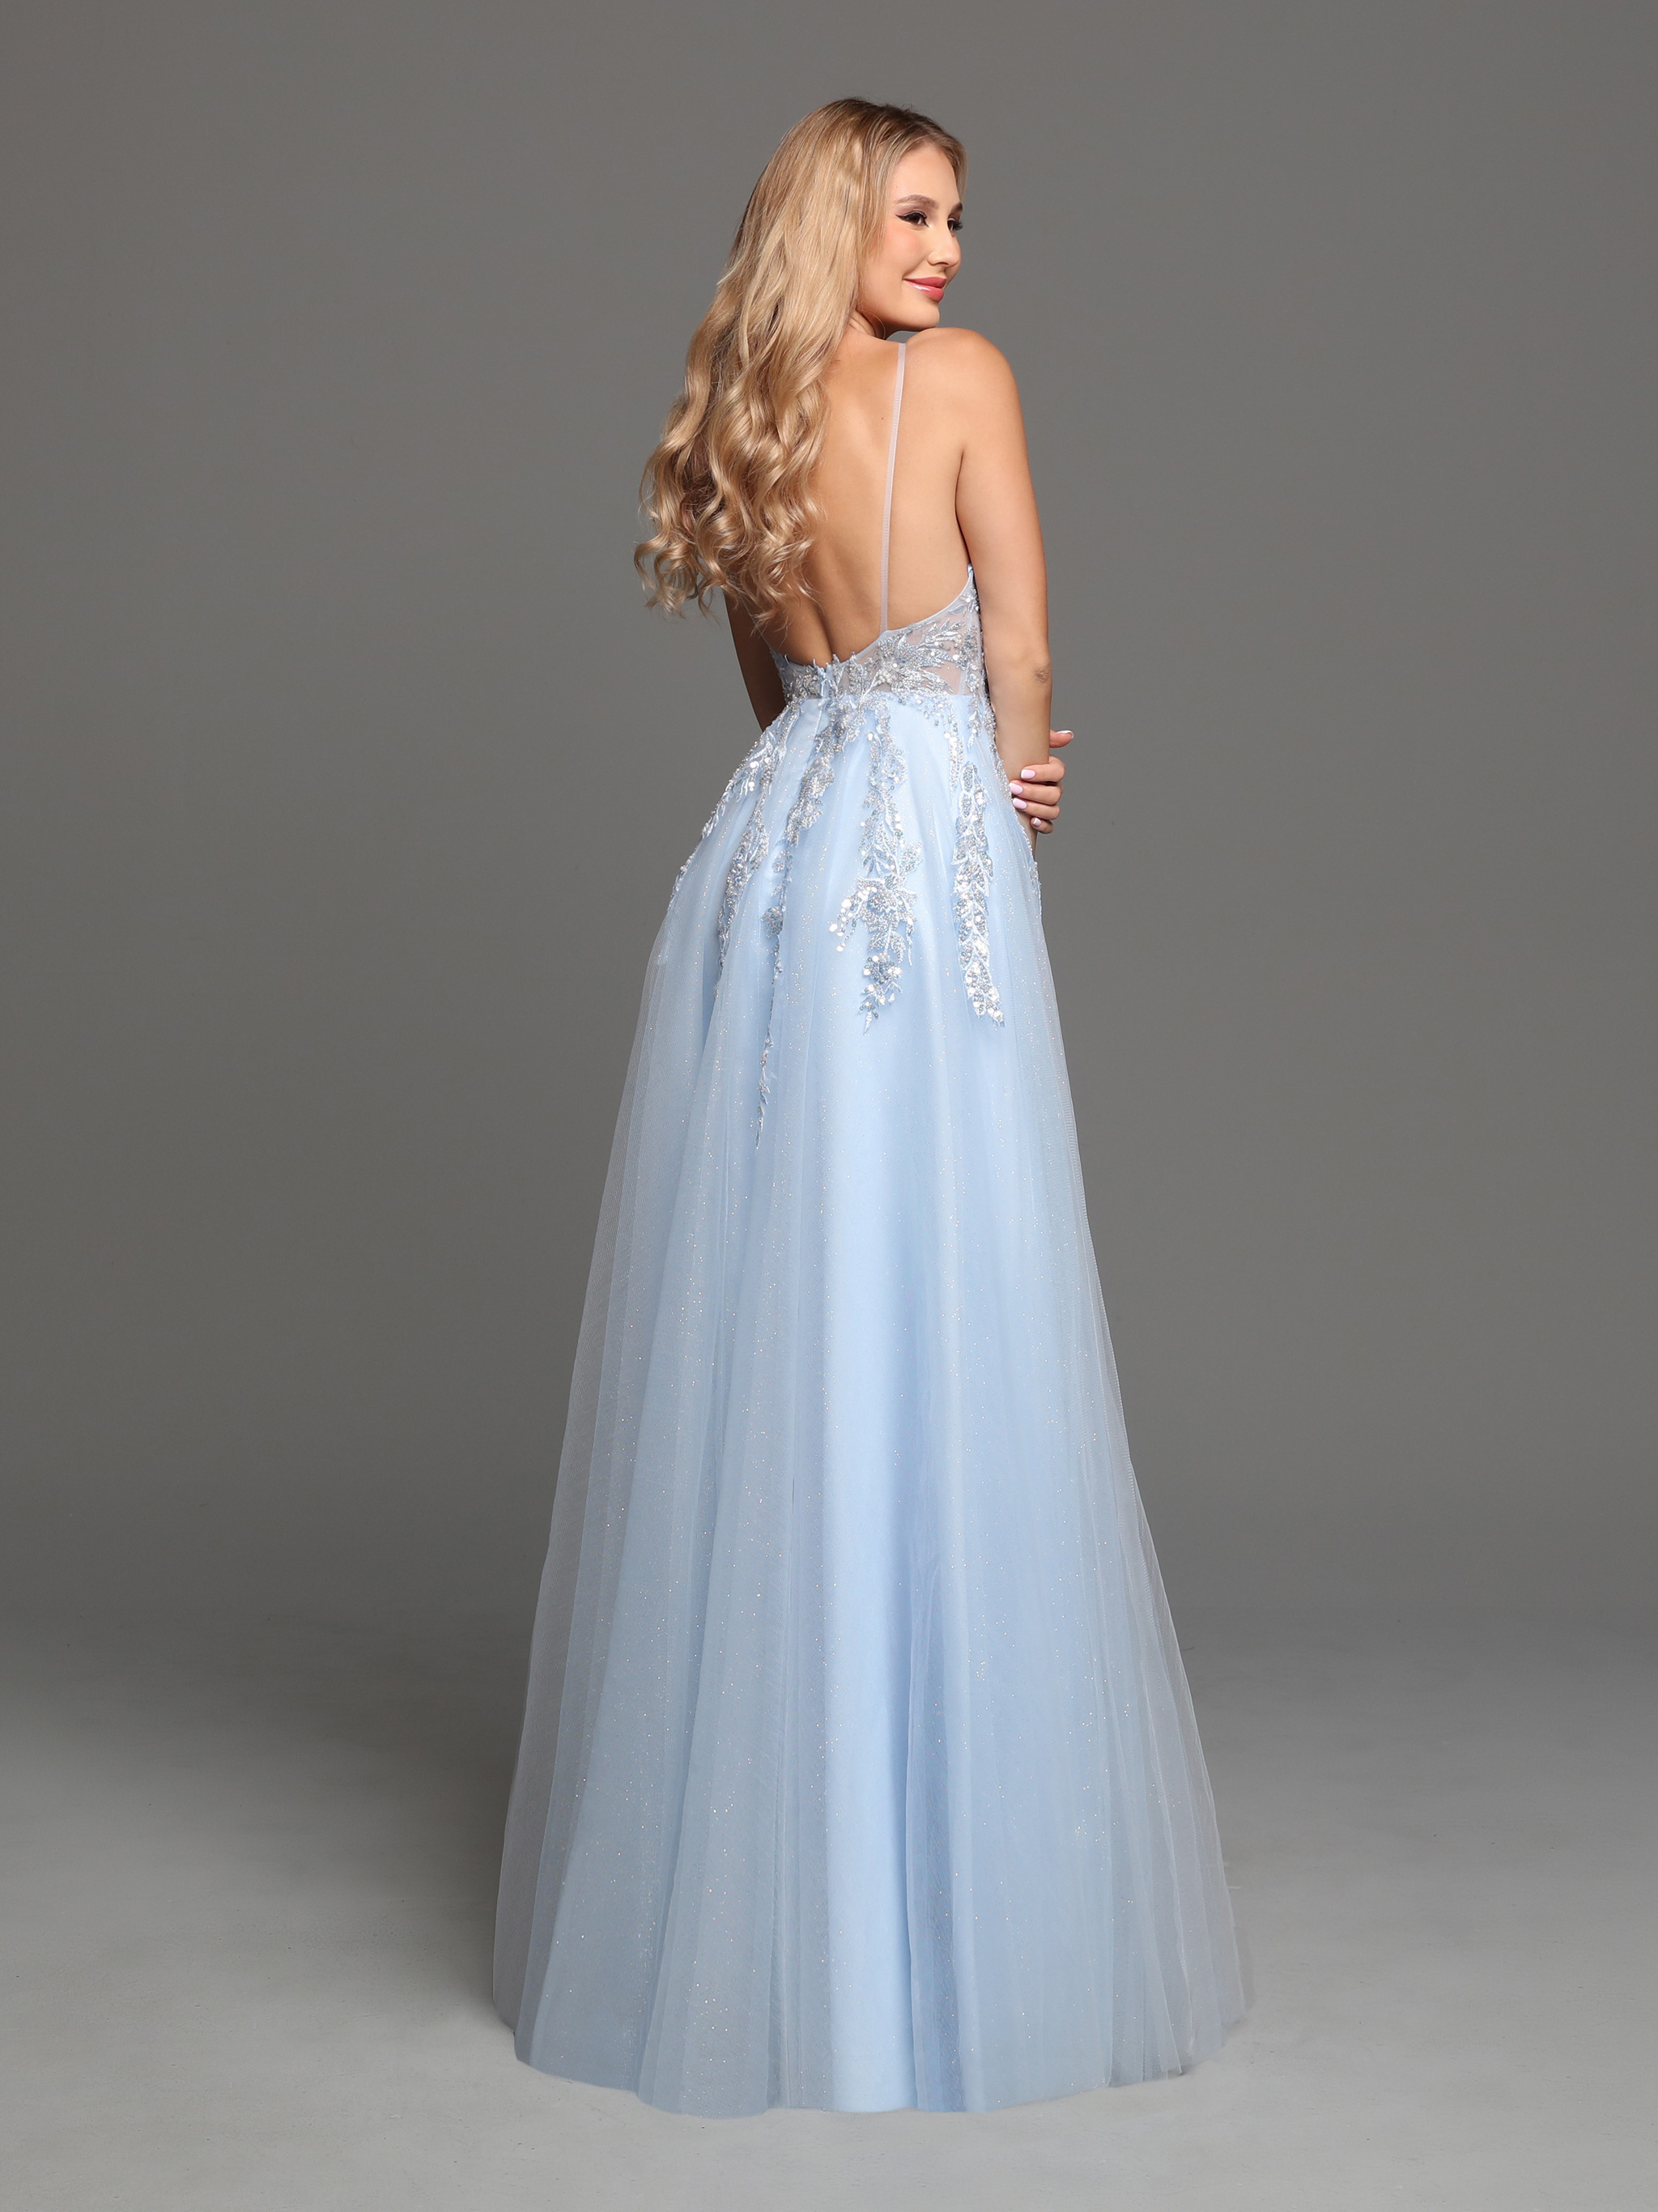 Image showing back view of style #72279